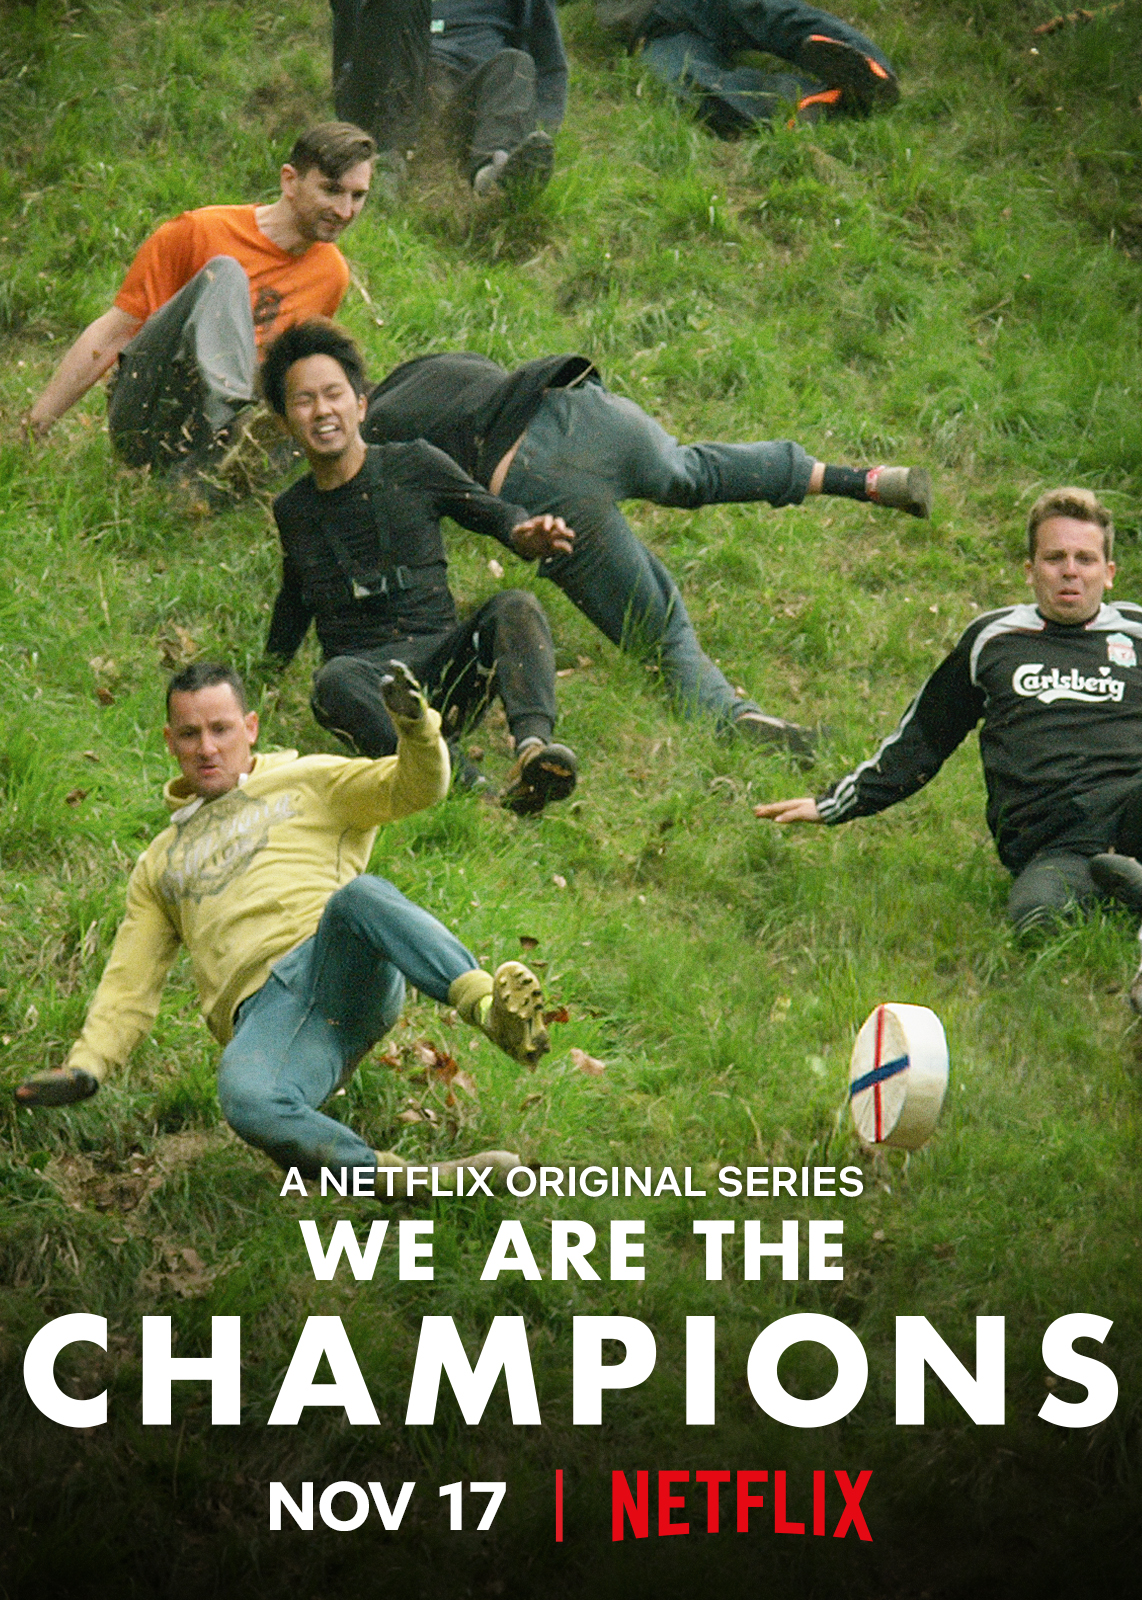 NETFLIX TRAILER DEBUT: We Are the Champions Premieres Nov 17th